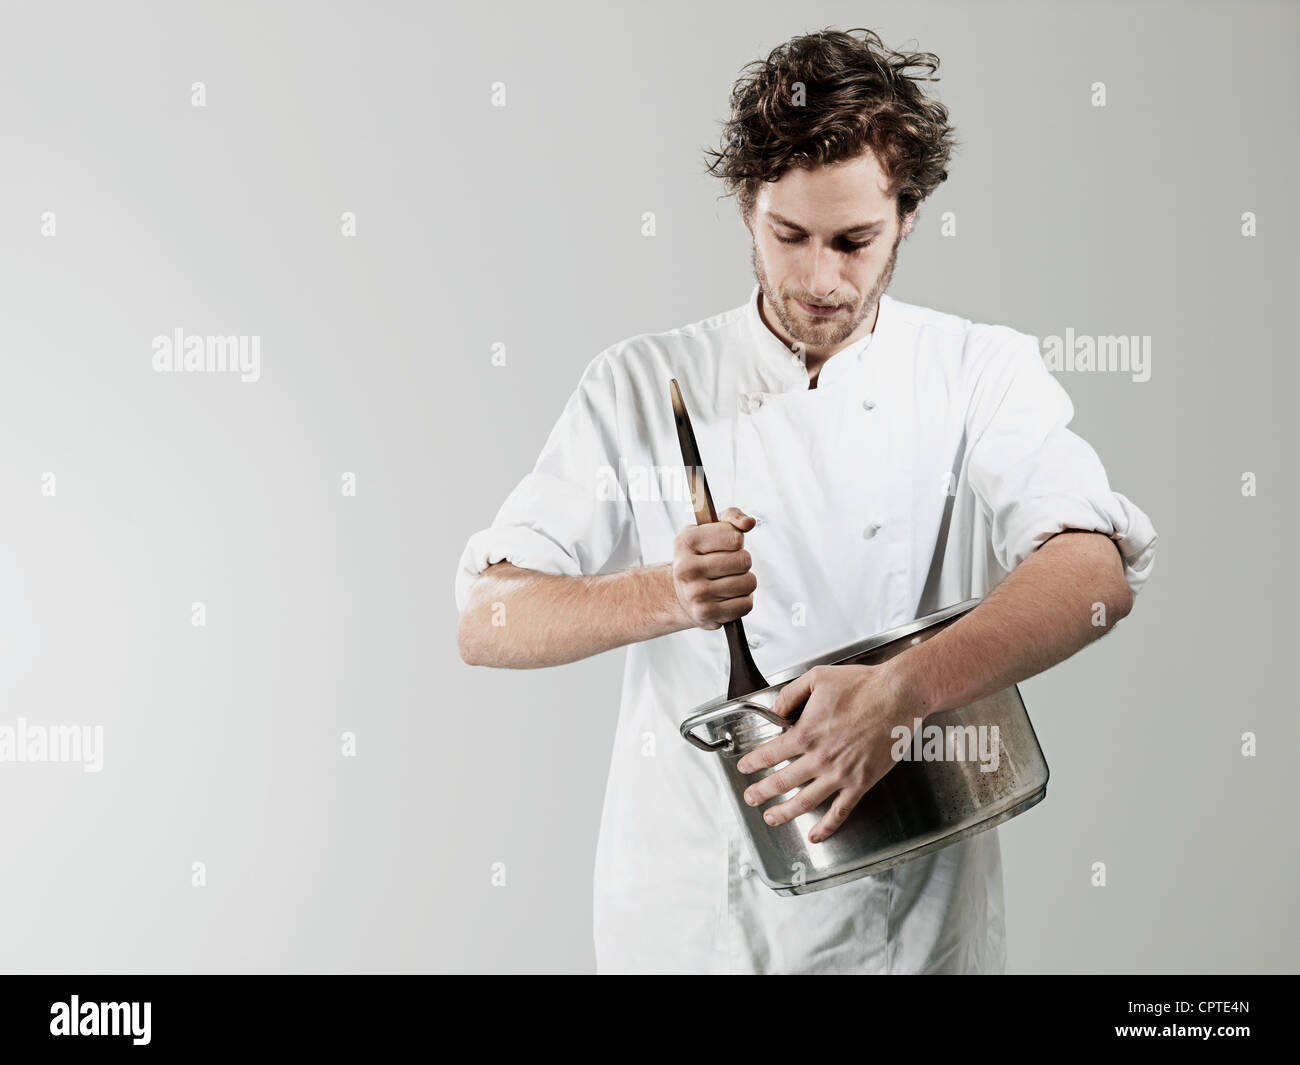 Chef stirring in pan against white background Stock Photo